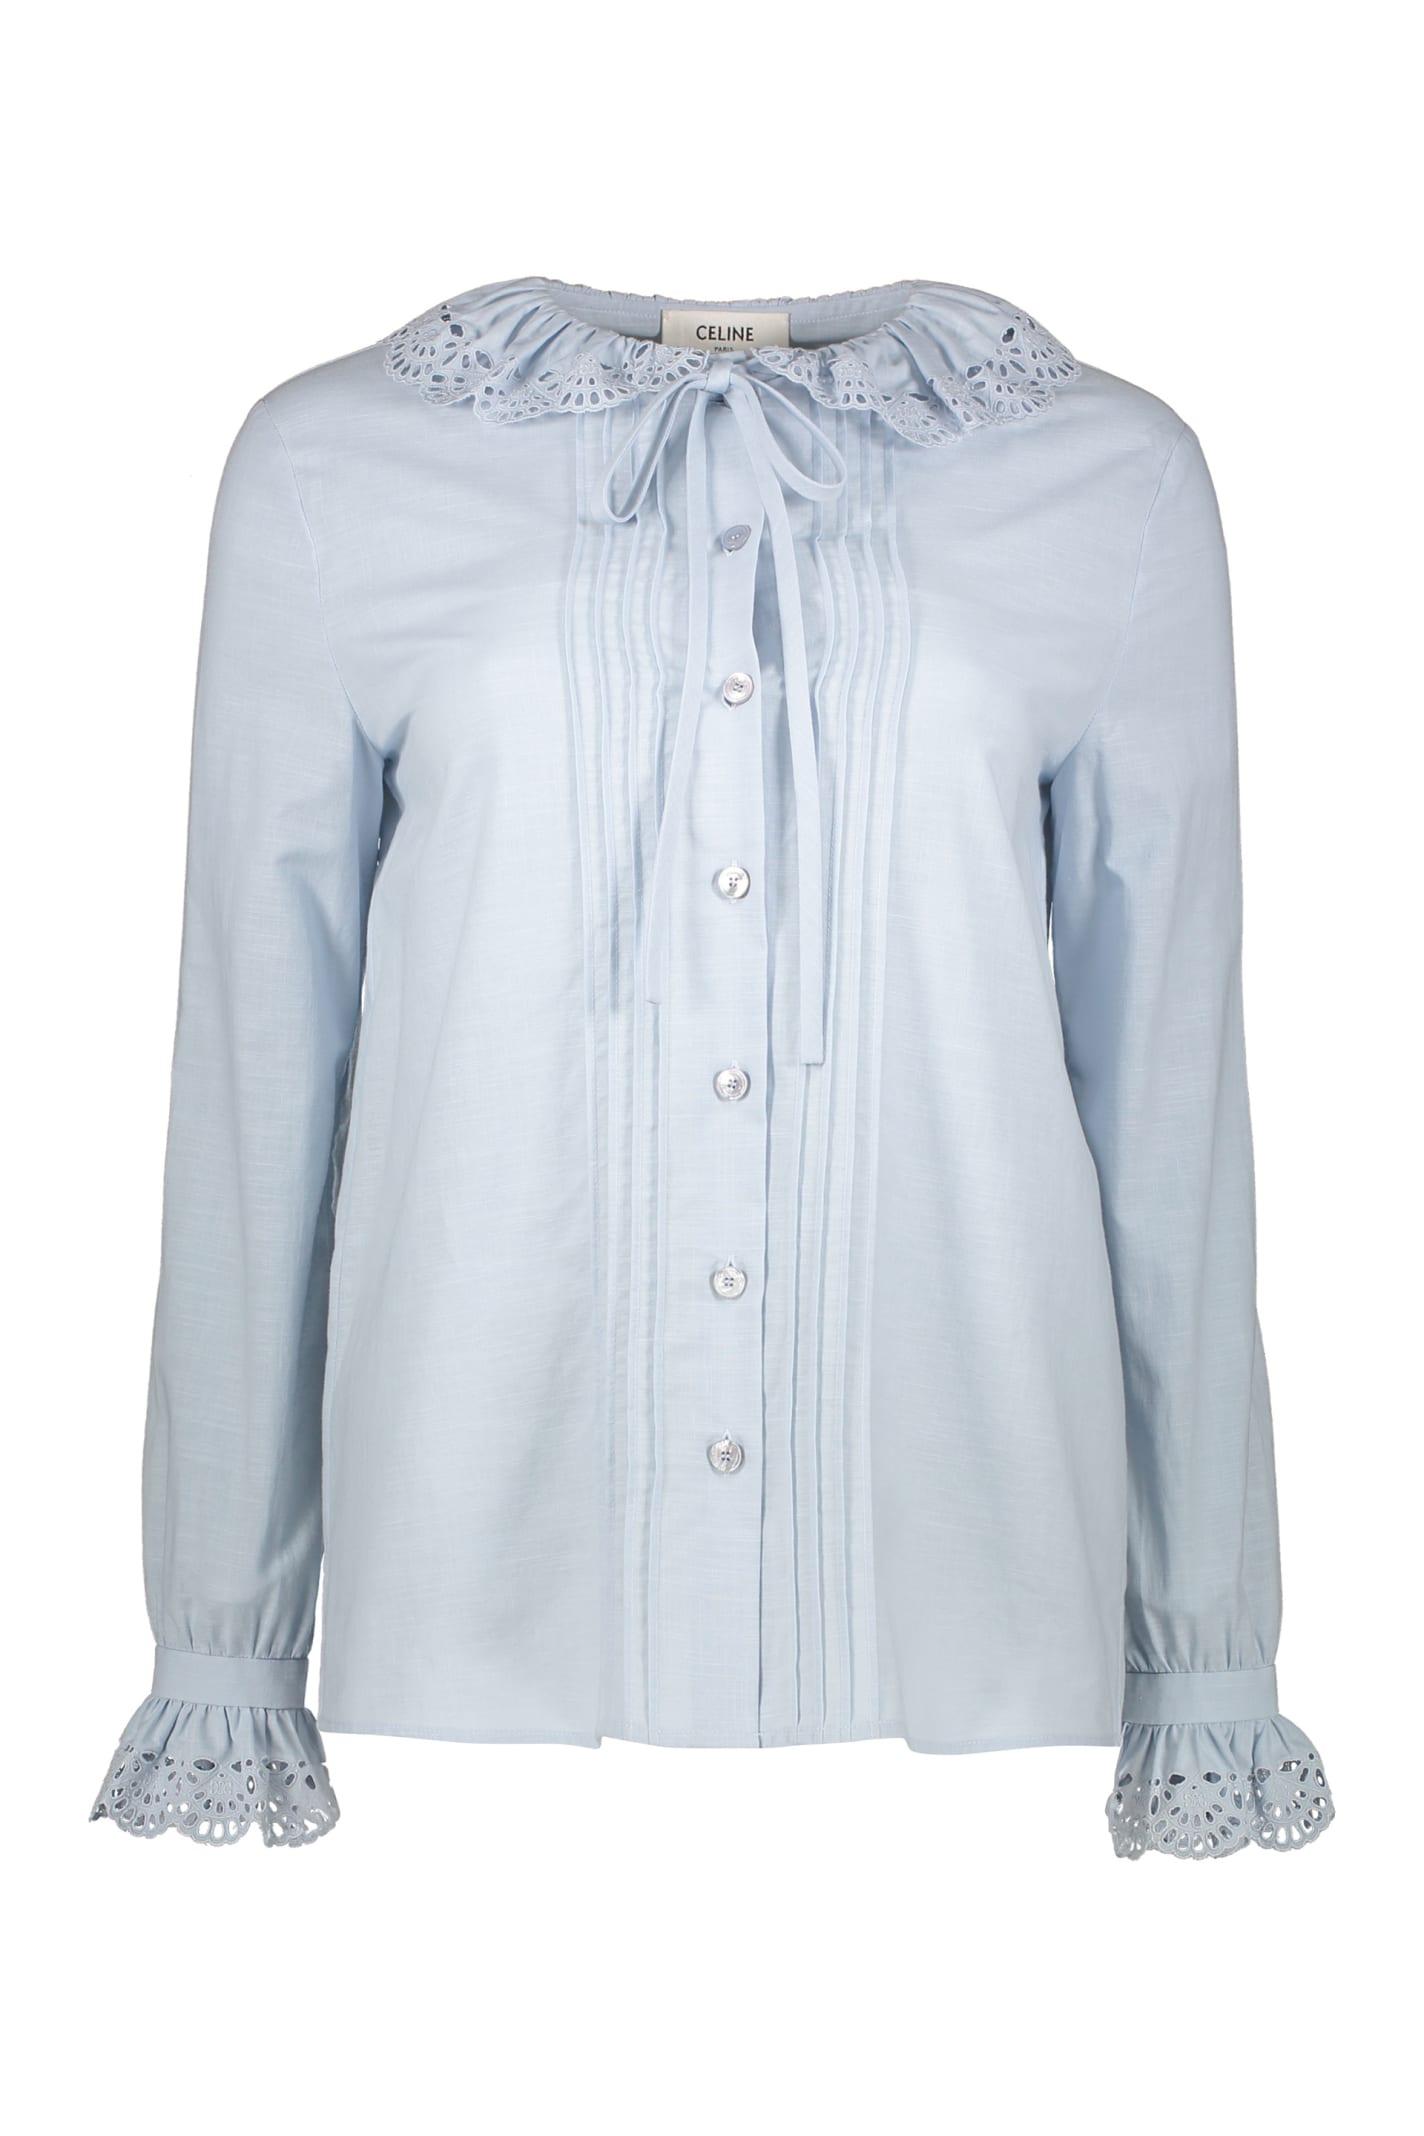 Celine Embroidered Cotton Blouse In Blue